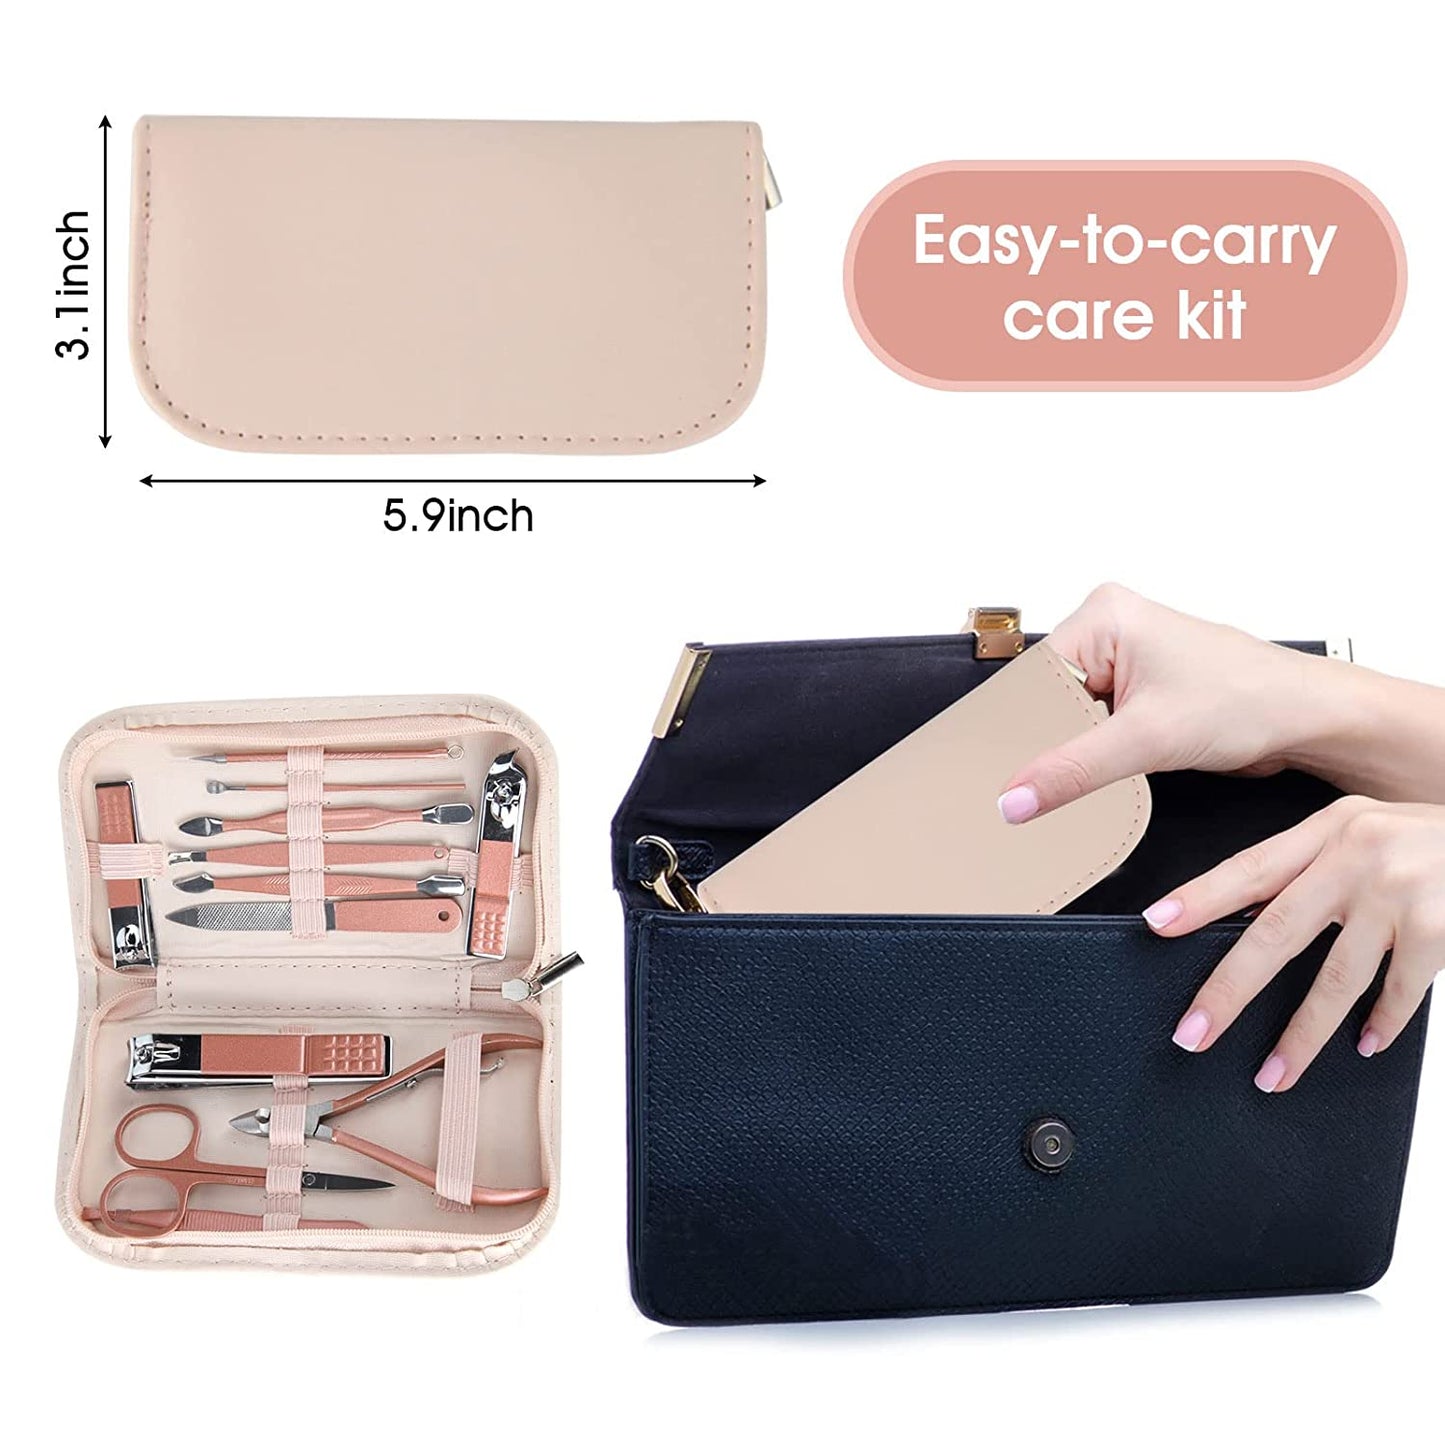 MFW Nail Clippers and Beauty Tool Portable Set, Rose Gold Martensitic Stainless Steel Manicure Set 12 in 1, with Pink Leather Bag, Suitable for Home, Workplace, Outdoor Travel, Gift Giving, Beauty Salon